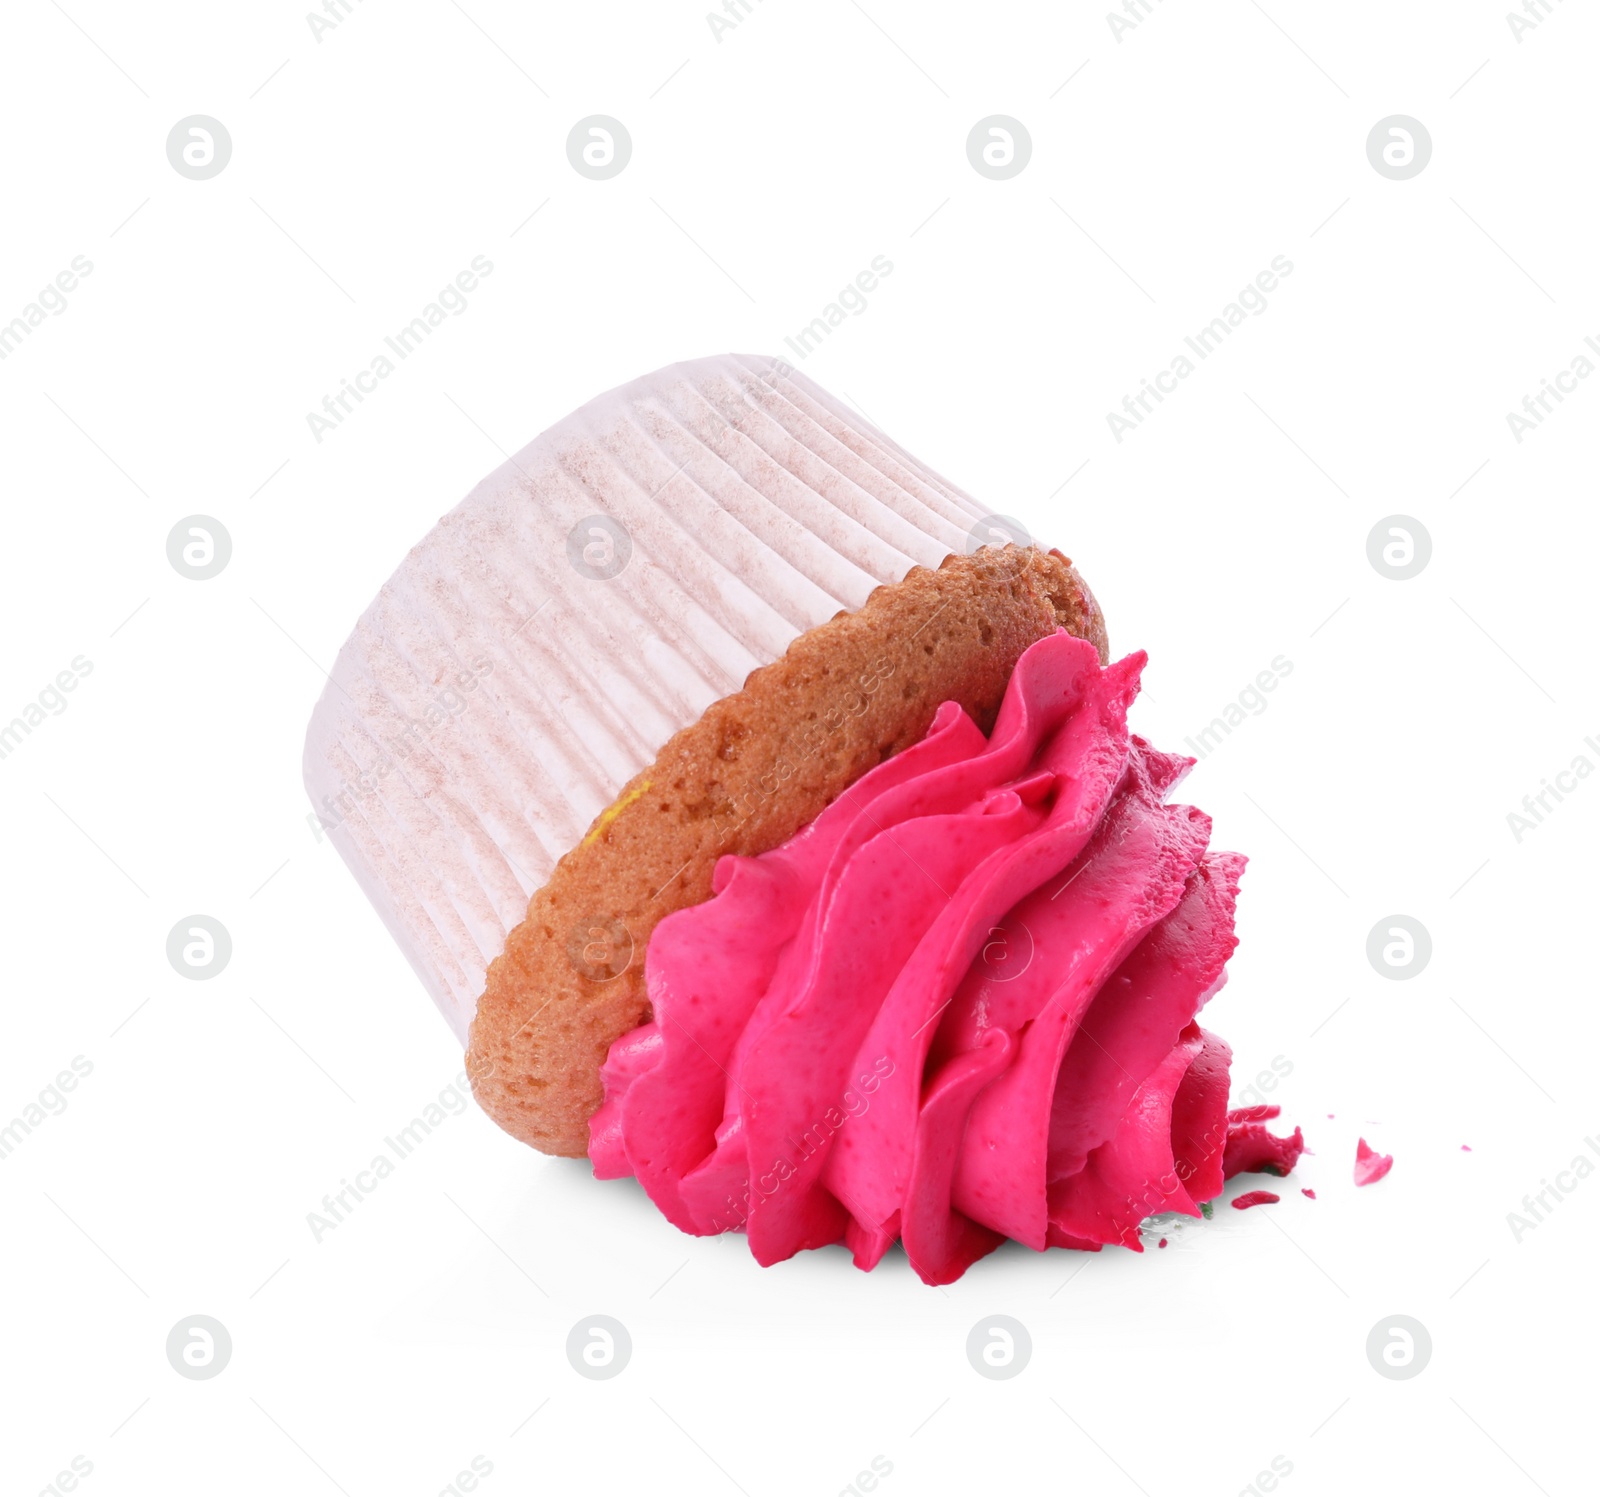 Photo of Dropped cupcake with cream on white background. Troubles happen